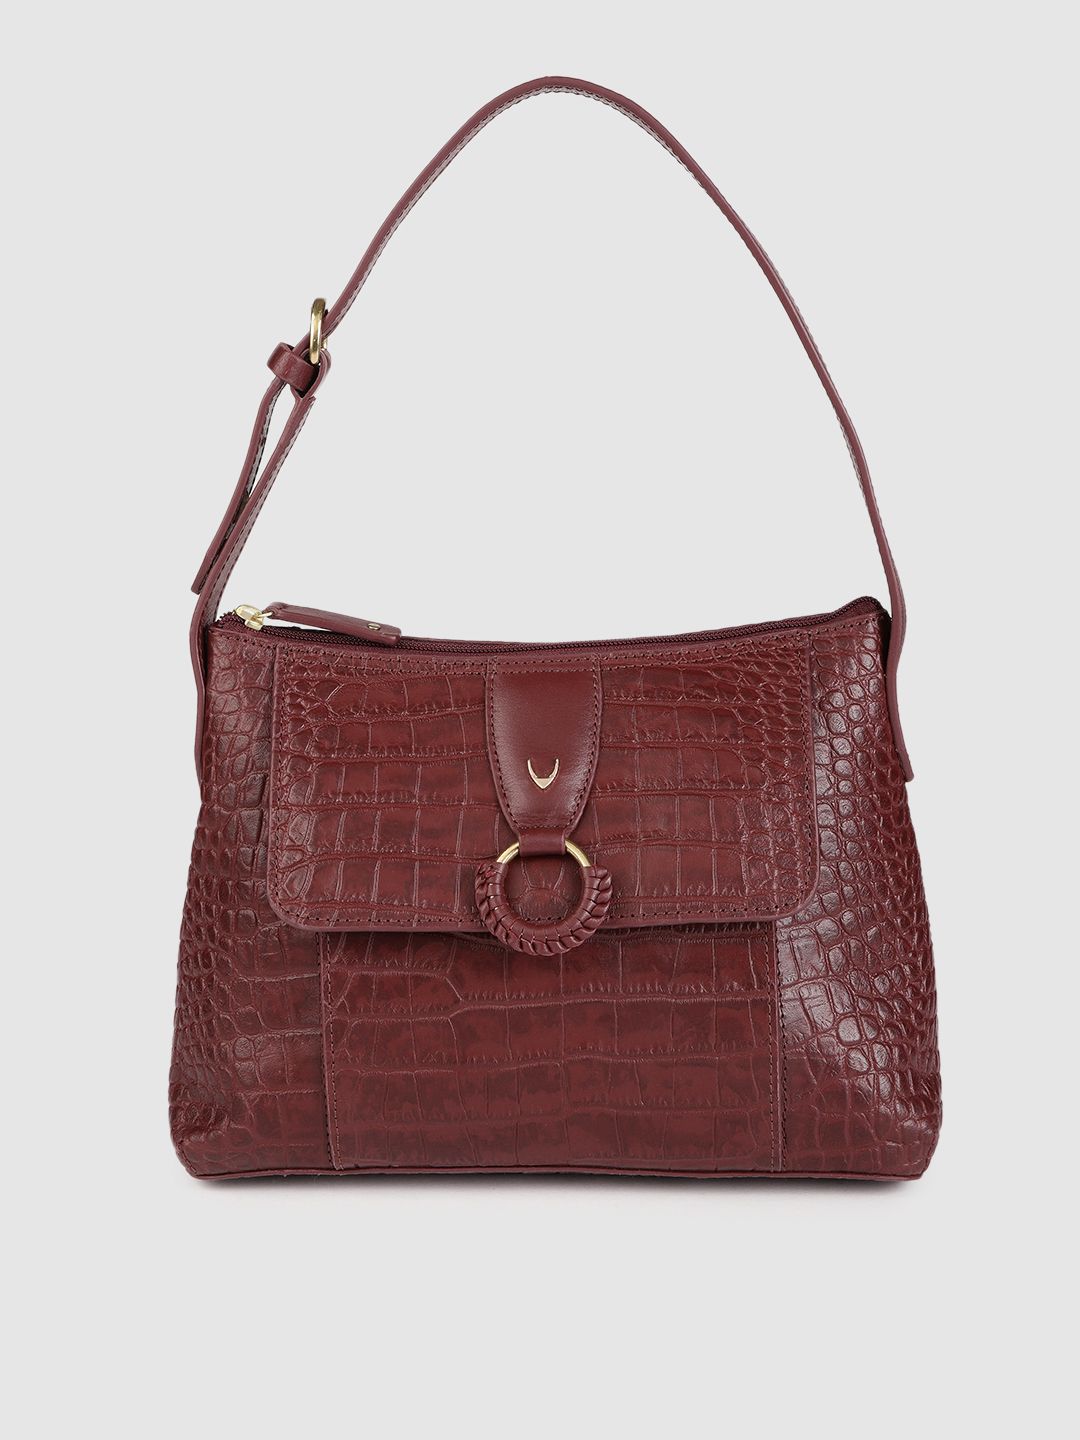 Hidesign Burgundy Textured Leather Structured Shoulder Bag Price in India